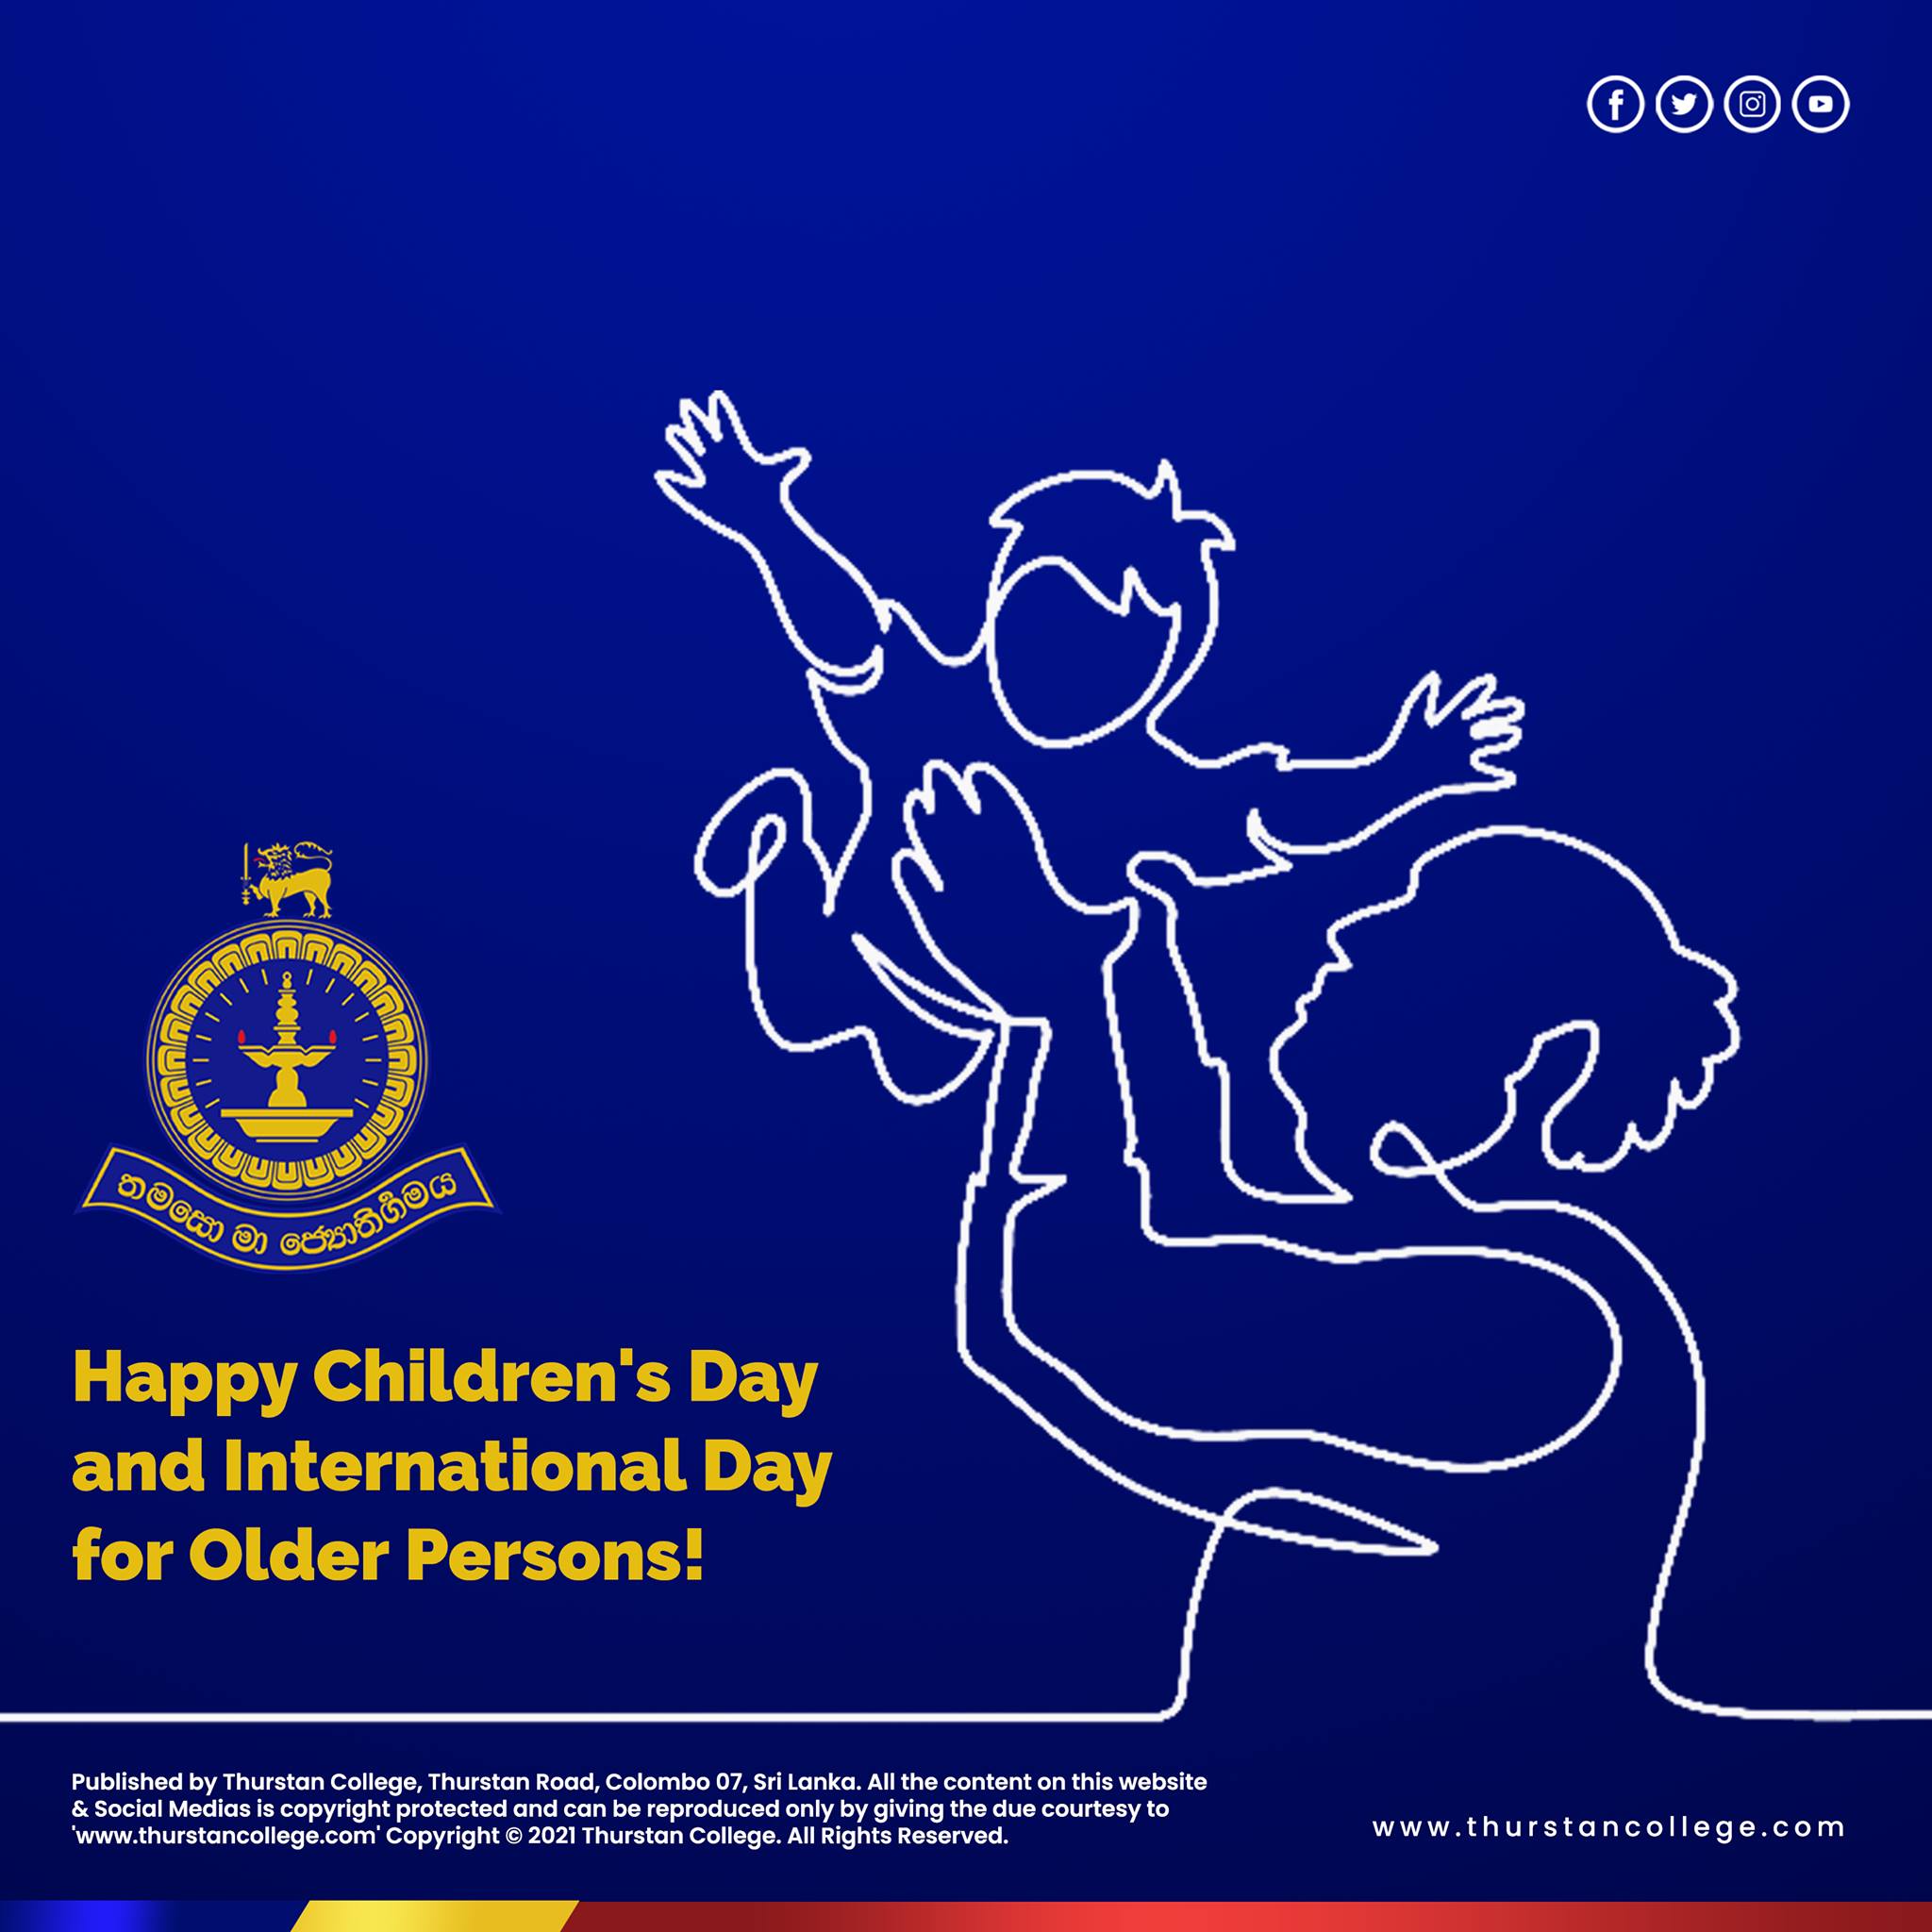 Happy Children's Day and International Day for Older Persons -2021!